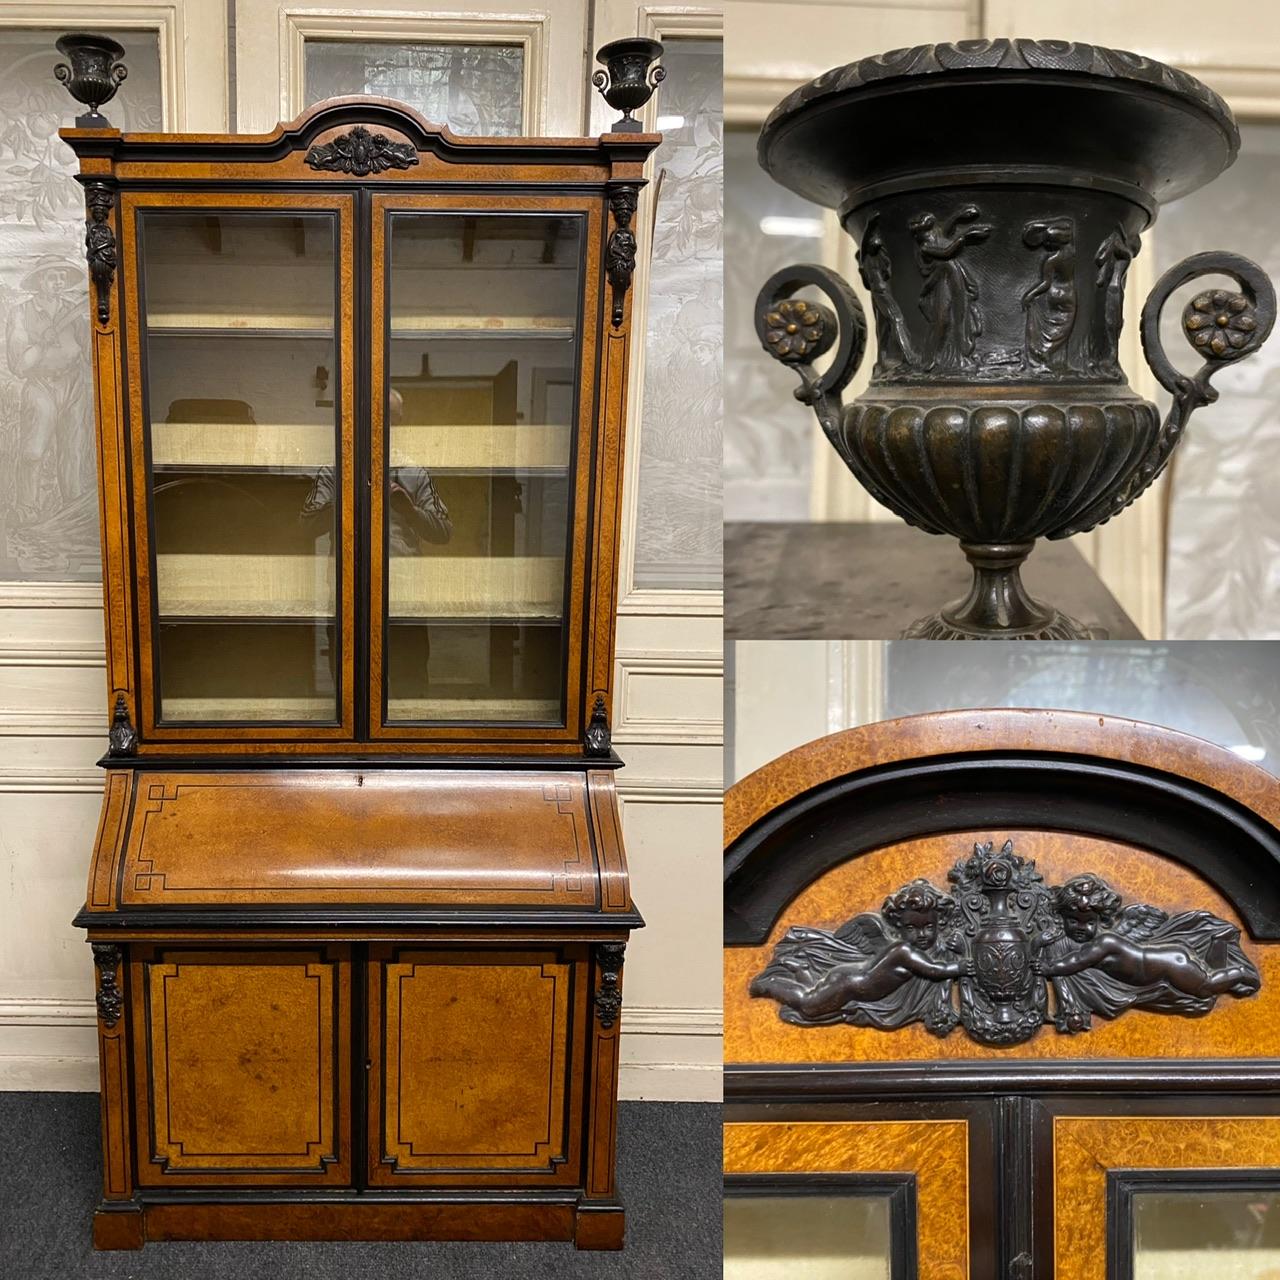 A superb piece of 19th Century Furniture, made in Italy predominantly from Amboyna wood but also Ebony. The 2 urns on top are bronze as are the mounts. The 2 top doors doors are fitted with plate glass and open to reveal 3 fully adjustable shelves,